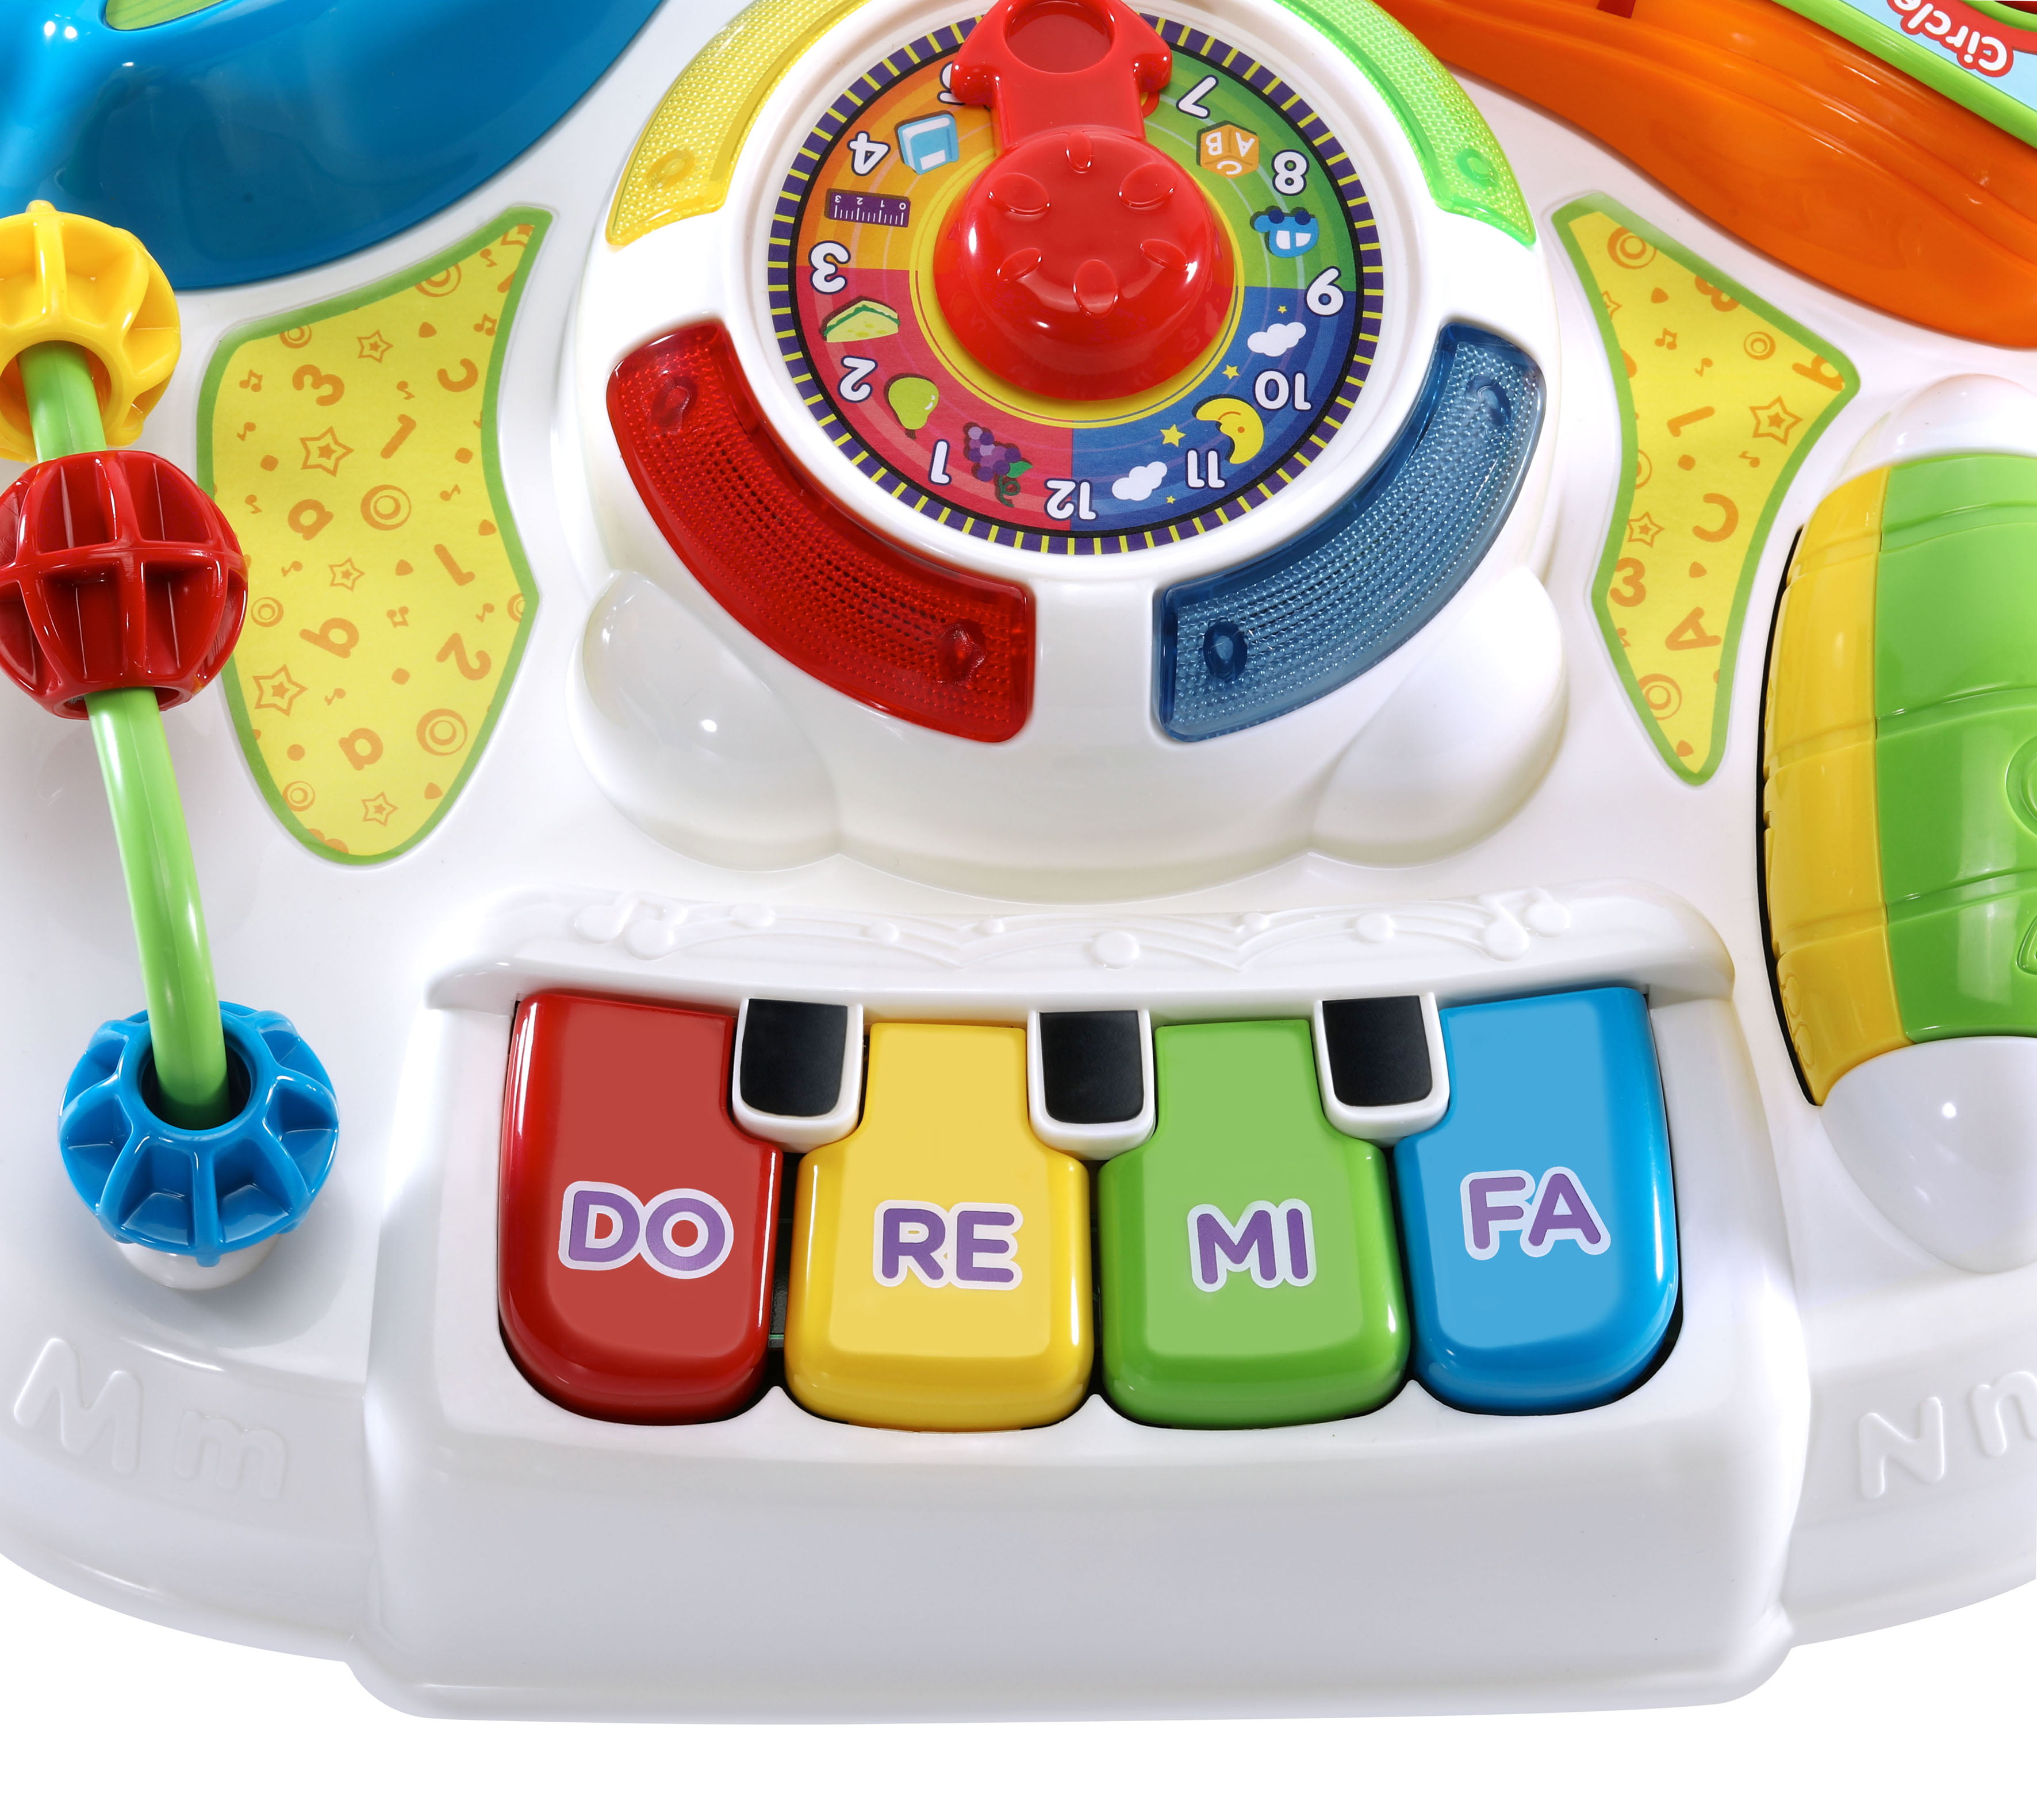 vtech sit to stand learn and discover table phone